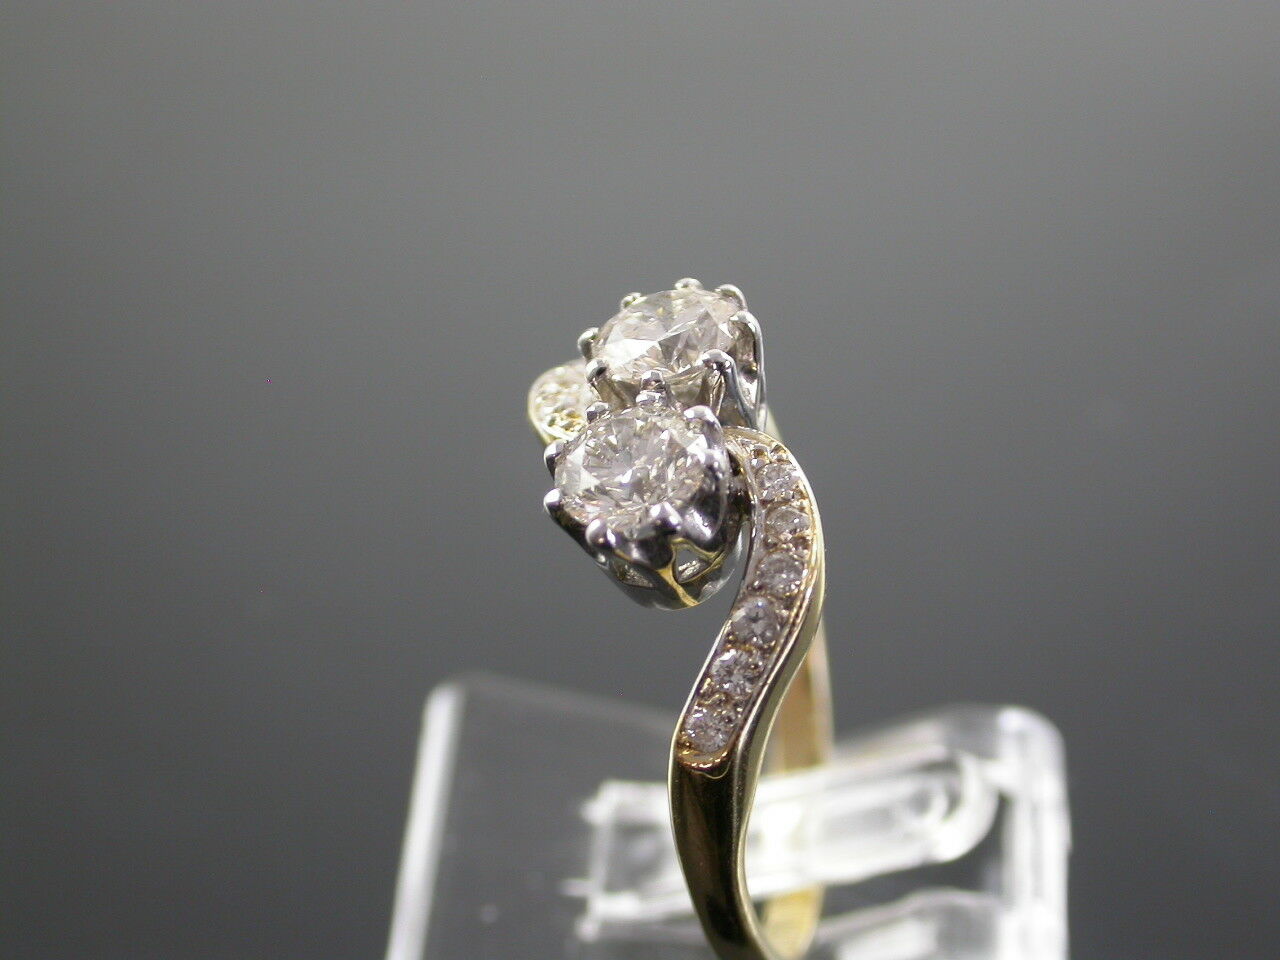 Vintage 18ct Gold 1.1ct Diamond Crossover Ring - Image 7 of 10